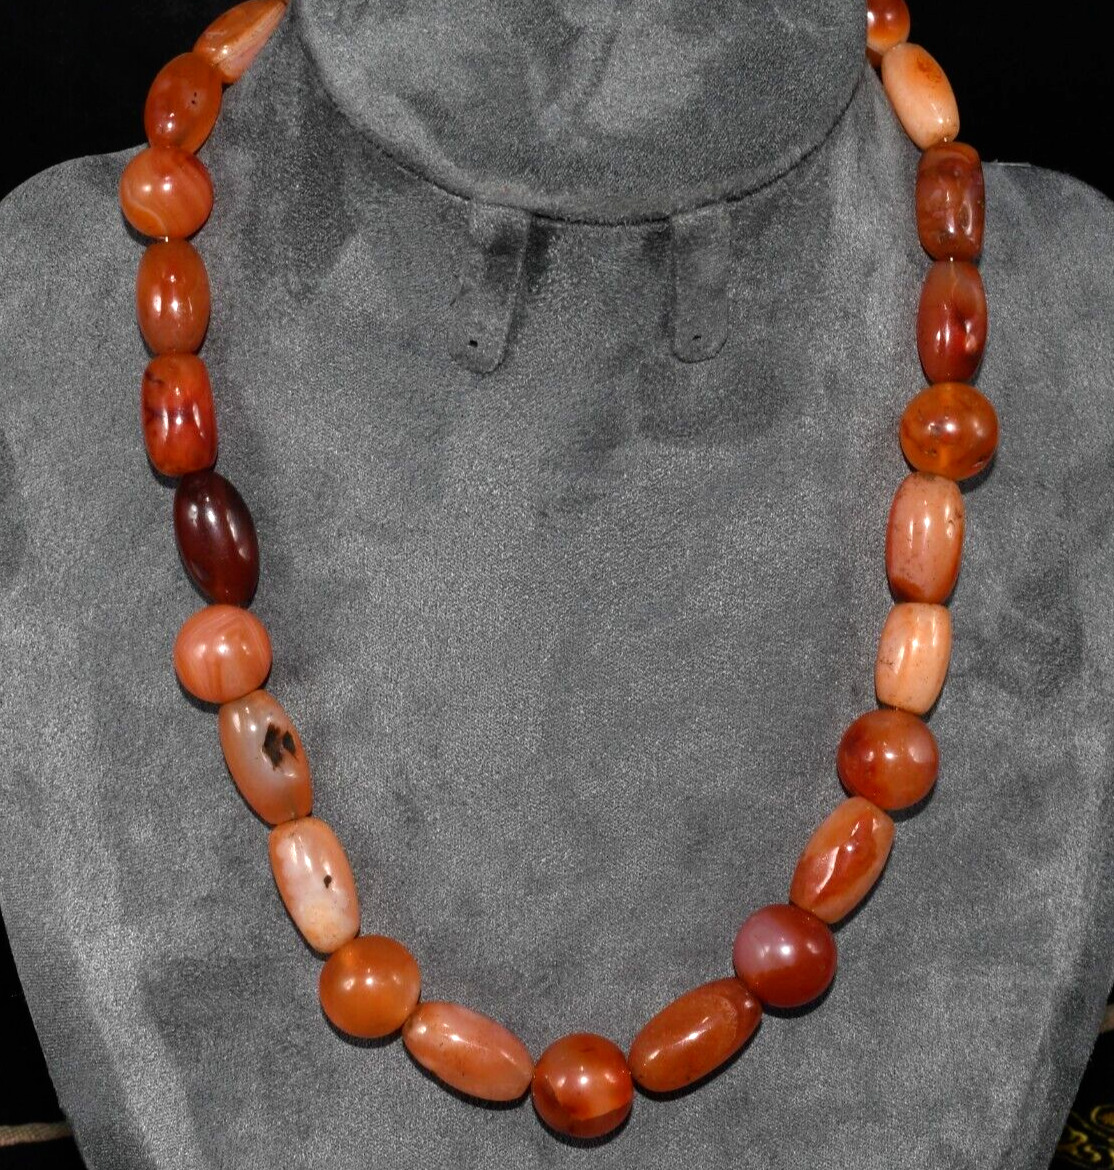 Ancient Old Carnelian Stone Bead Necklace from Middle East in good Condition